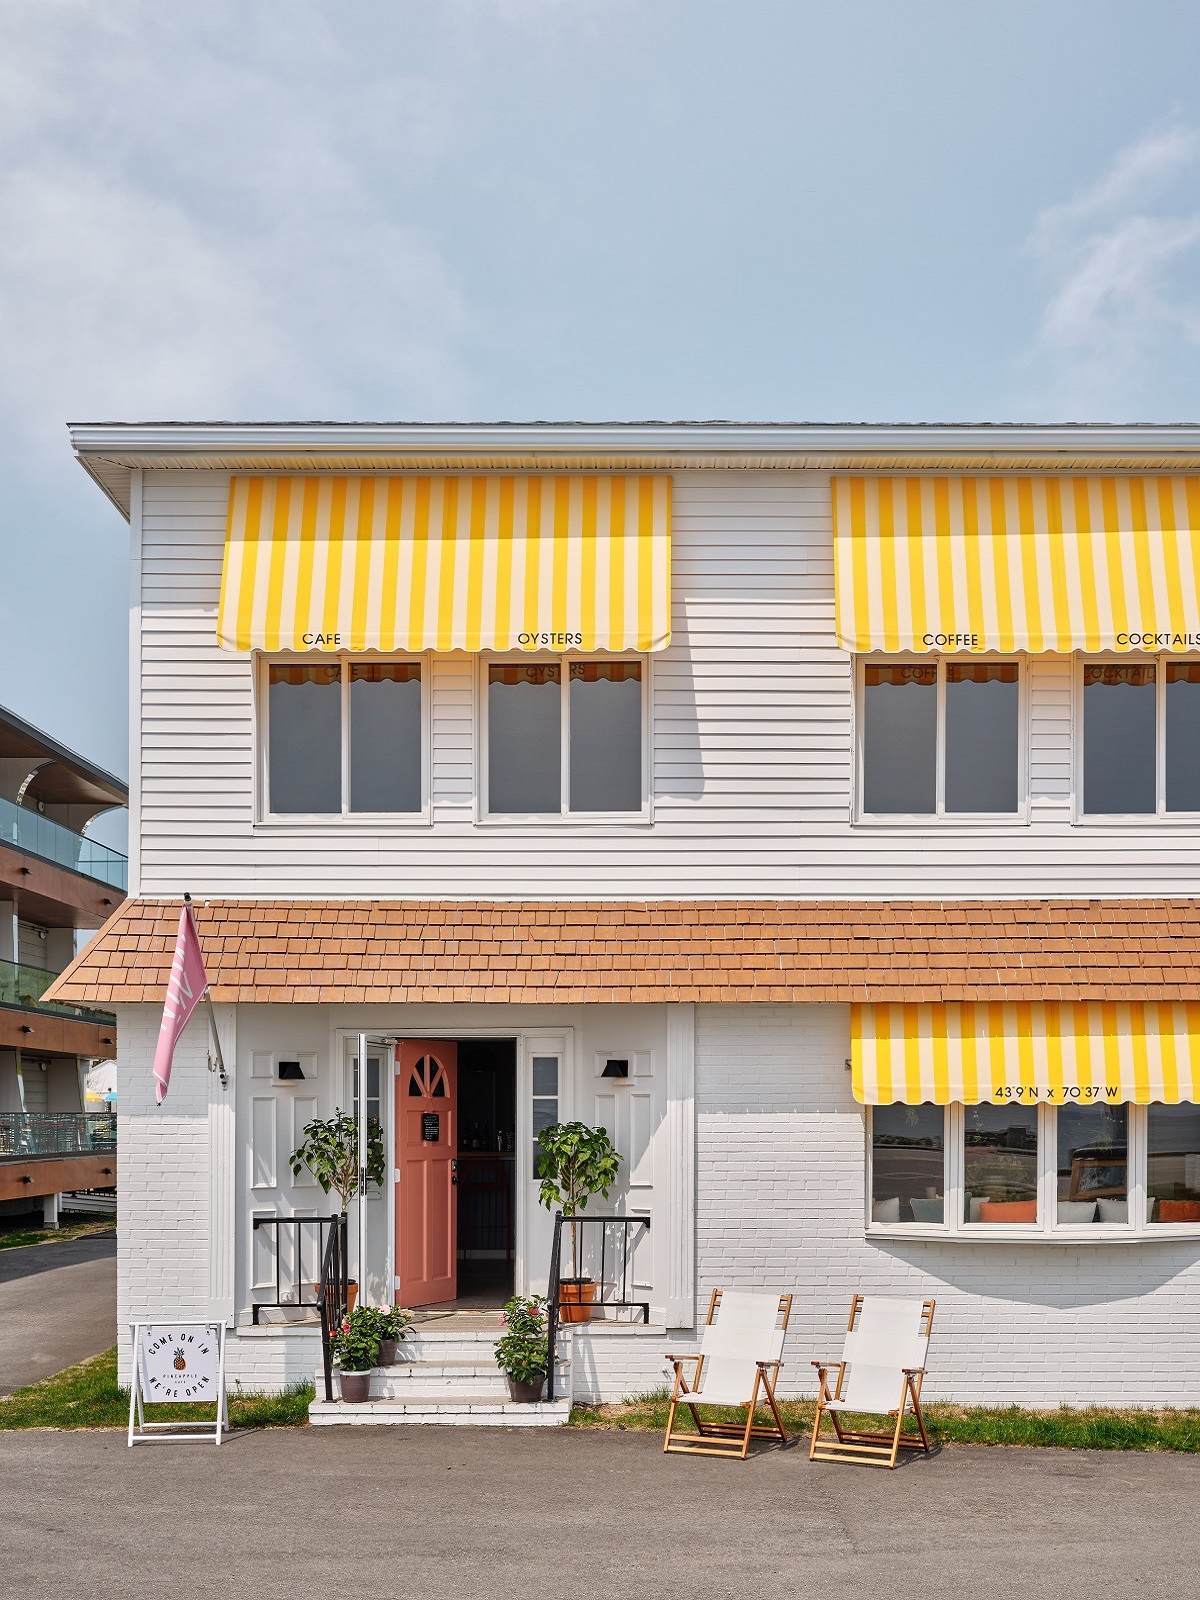 exterior motel style vintage hotel facade with yellow striped awnings and clapboard surface details